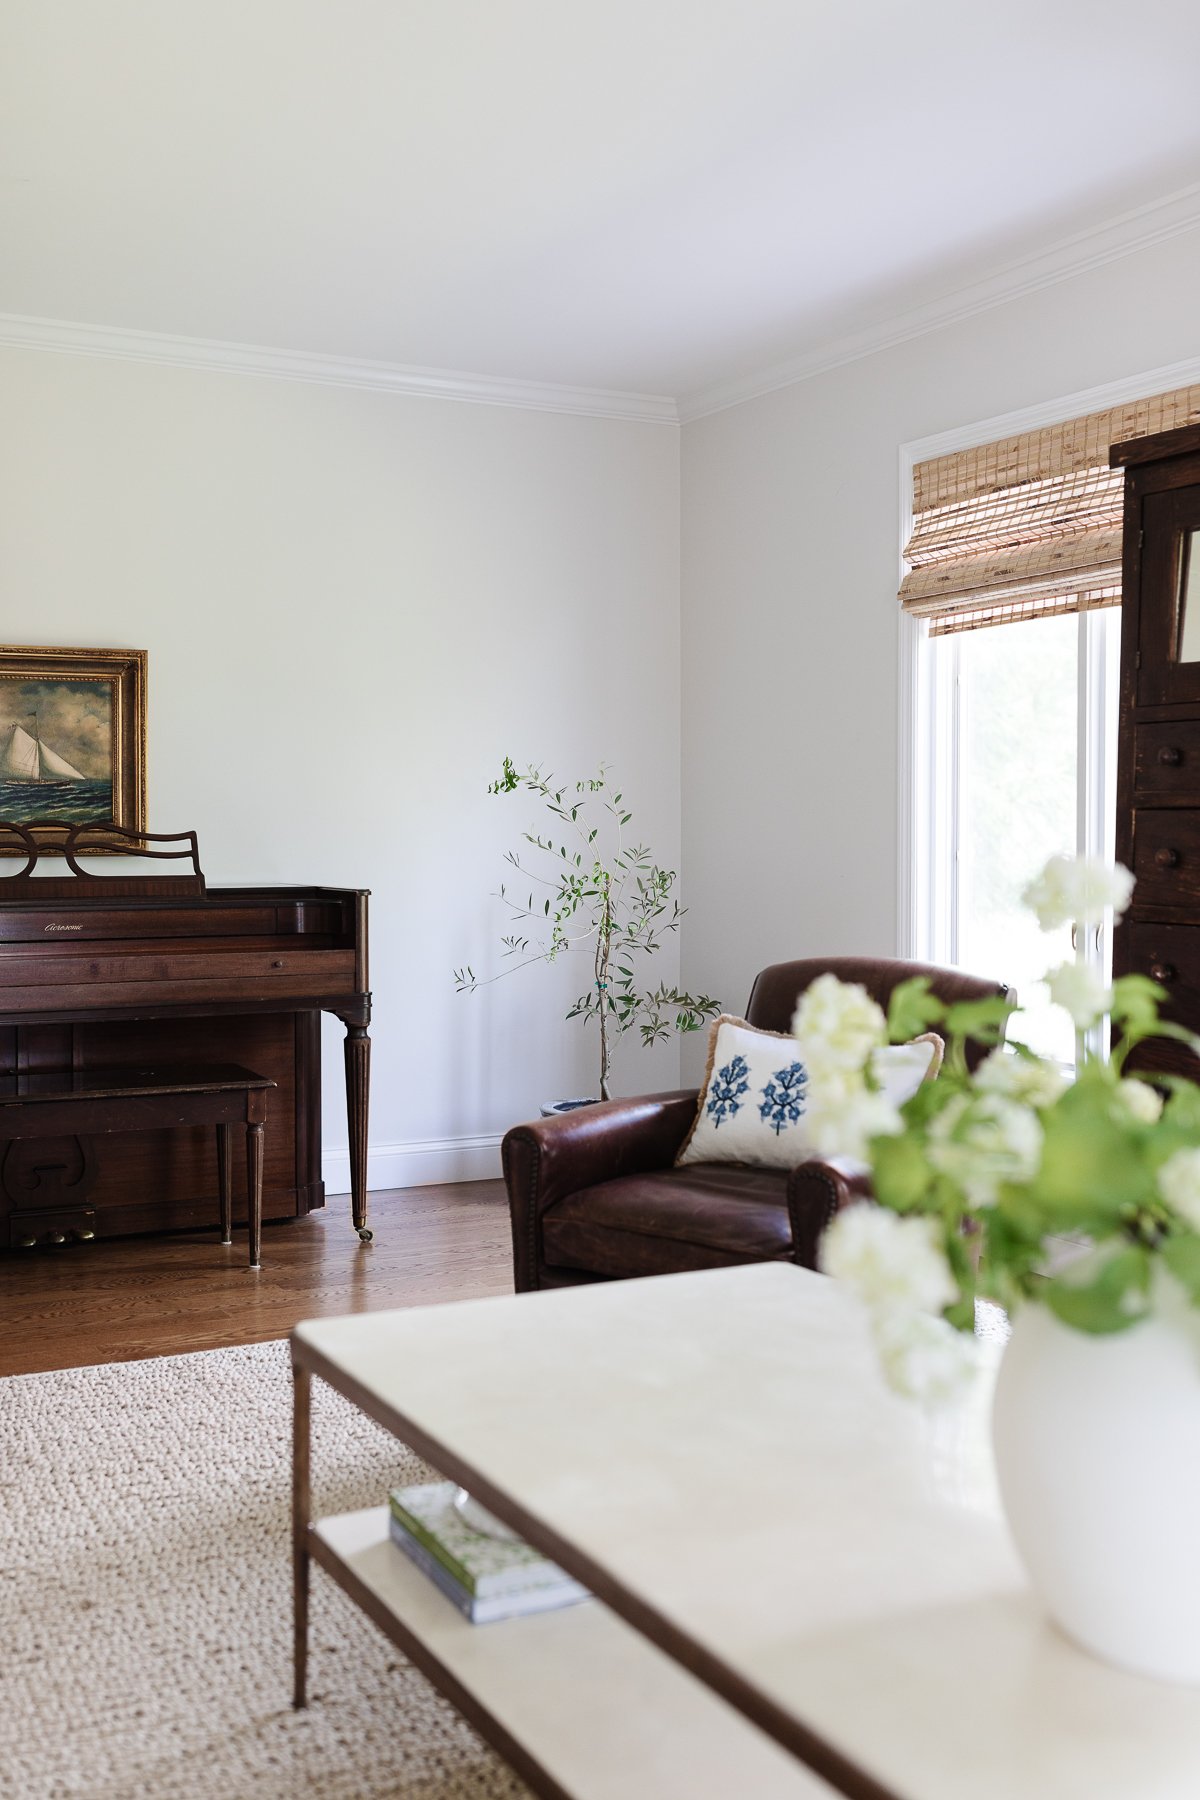 A piano in a family music room.